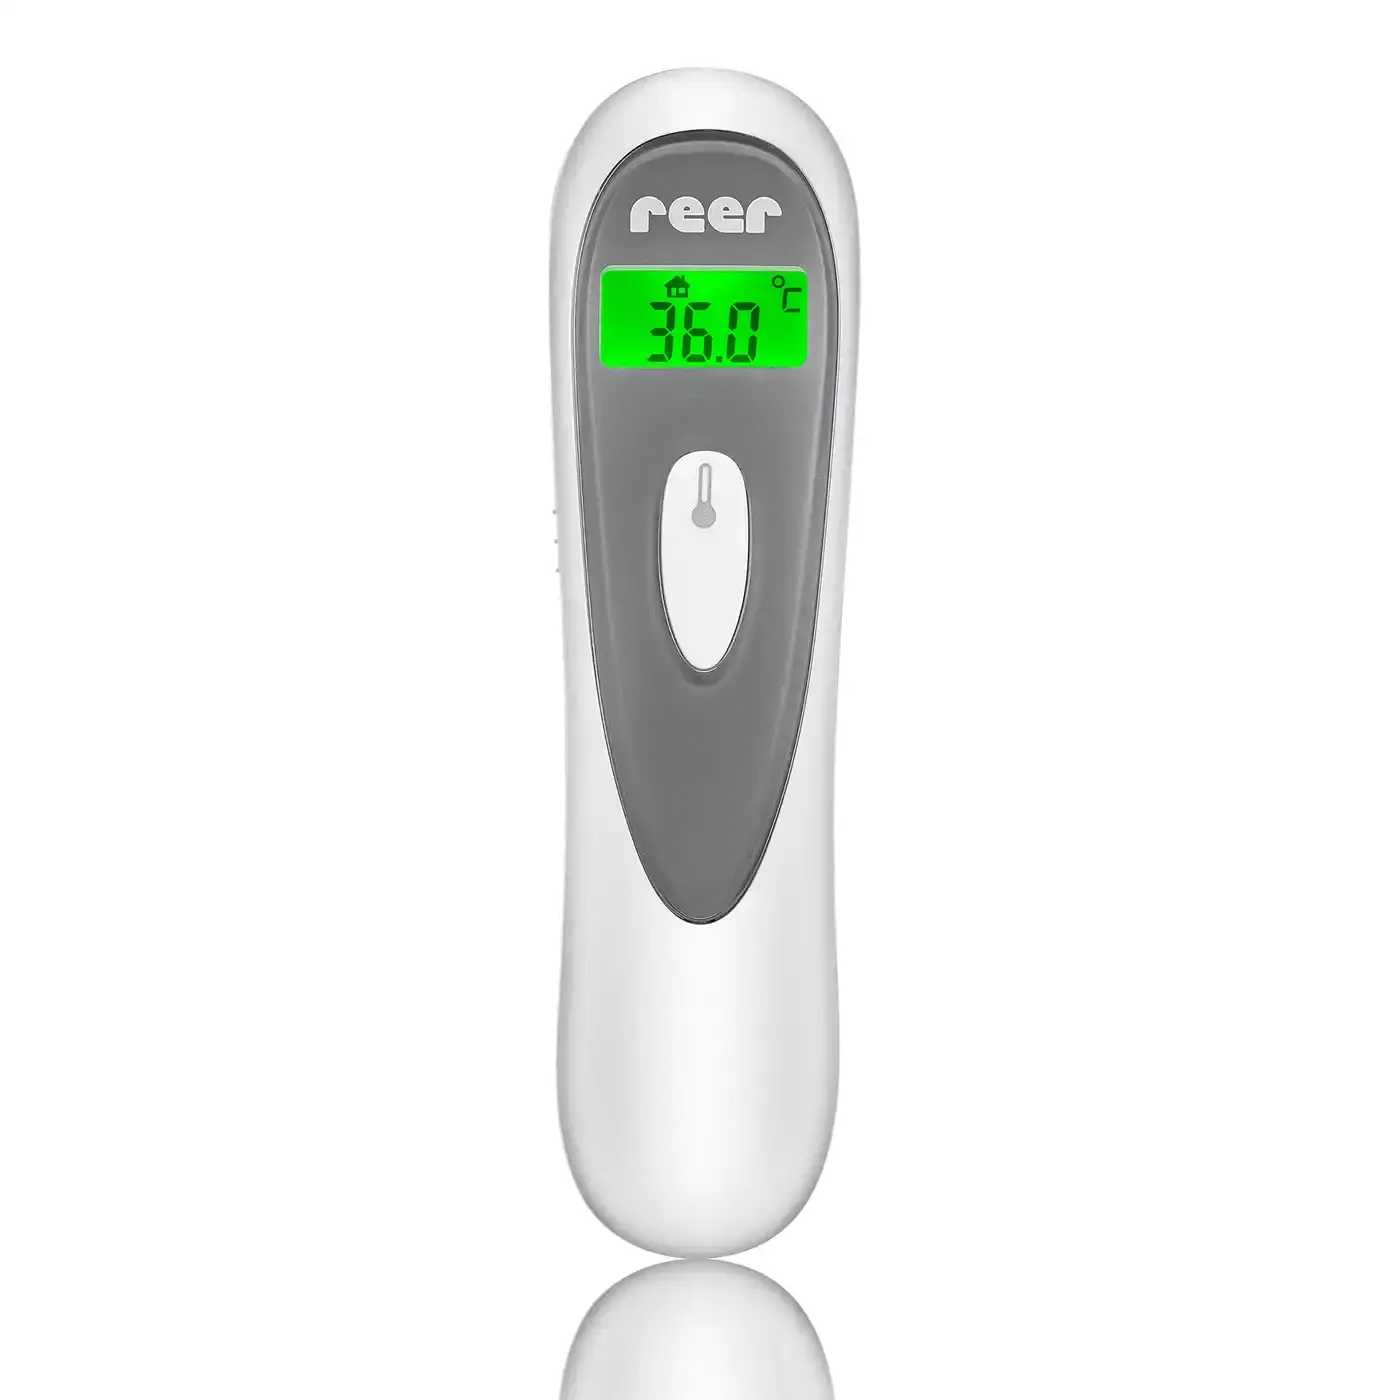 Colour SoftTemp 3-in-1 Fieberthermometer reer Mehrfarbig 2000578888909 1